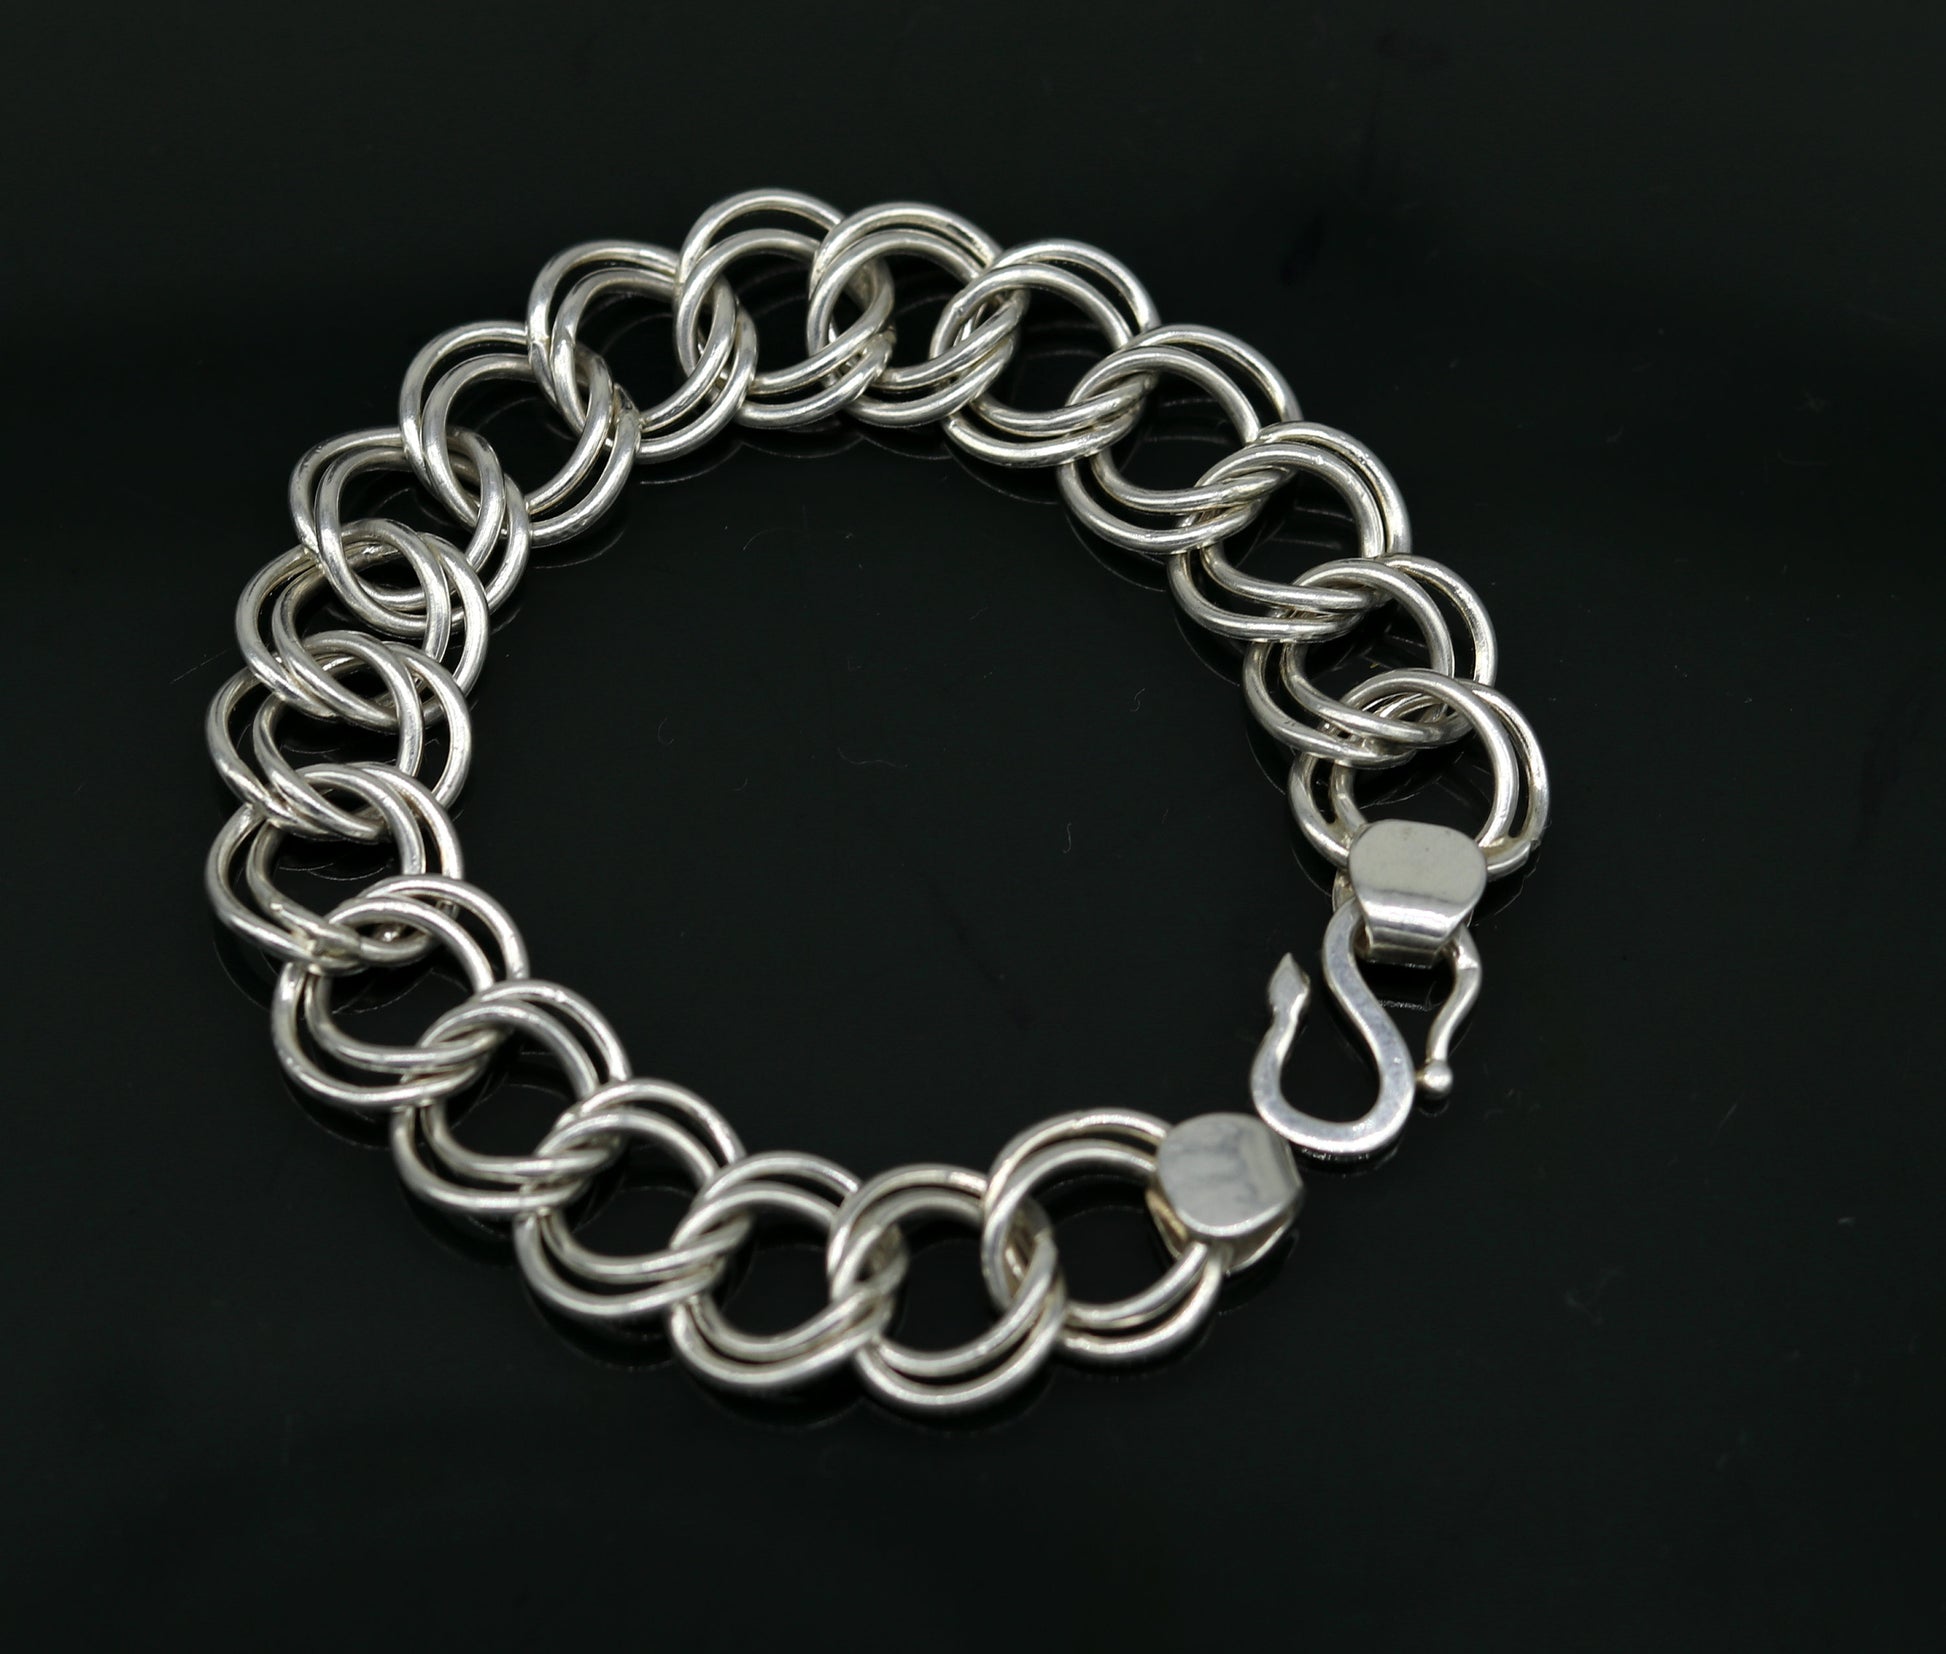 7.5" inches 925 sterling silver handmade double link chain bracelet customized design gorgeous personalized gifting unisex jewelry sbr193 - TRIBAL ORNAMENTS